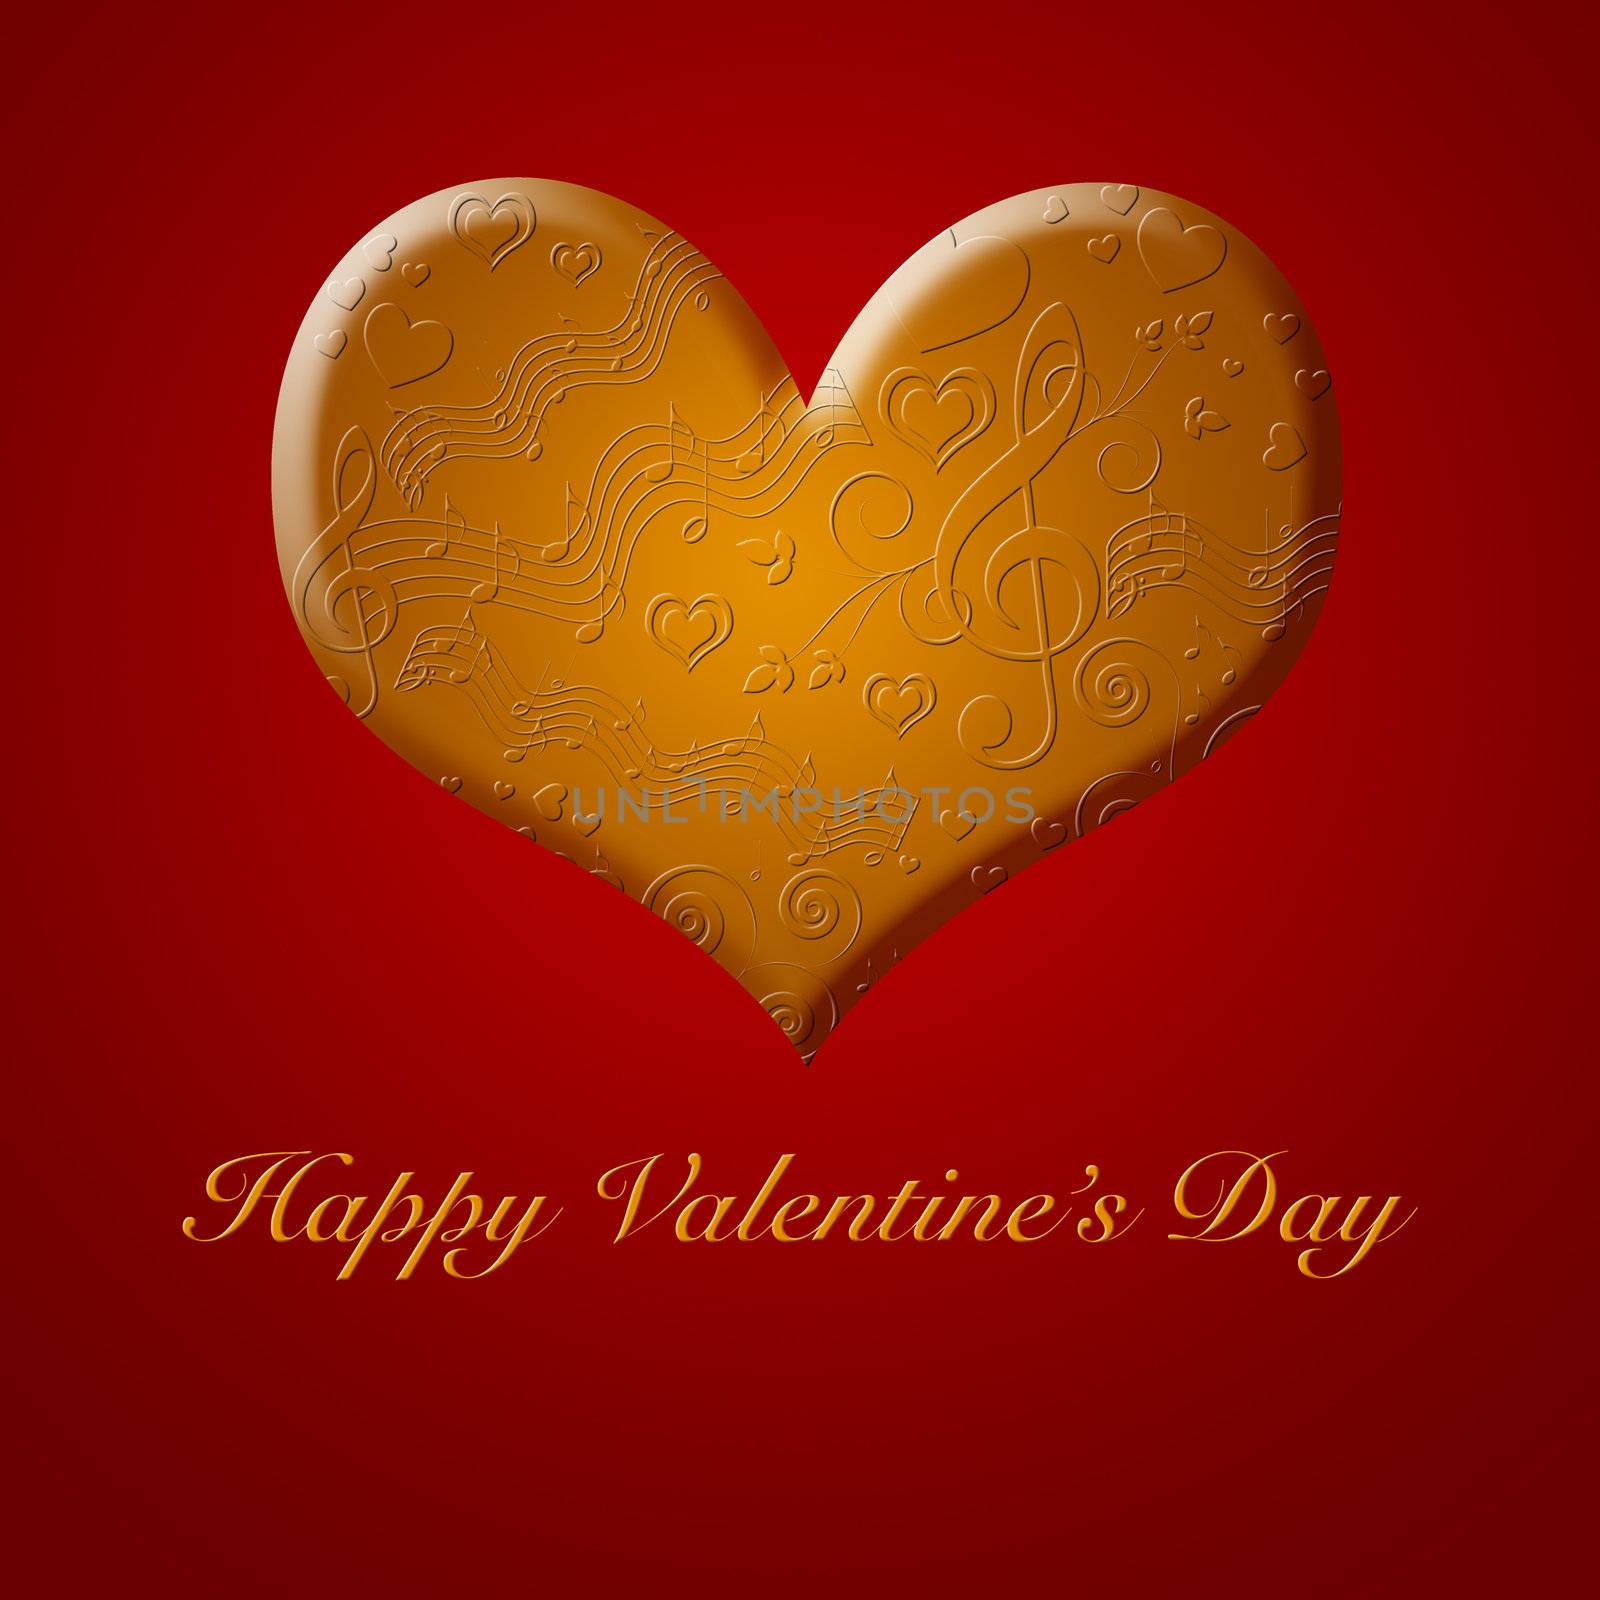 Happy Valentines Day Musical Notes Songs from the Heart Gold Illustration